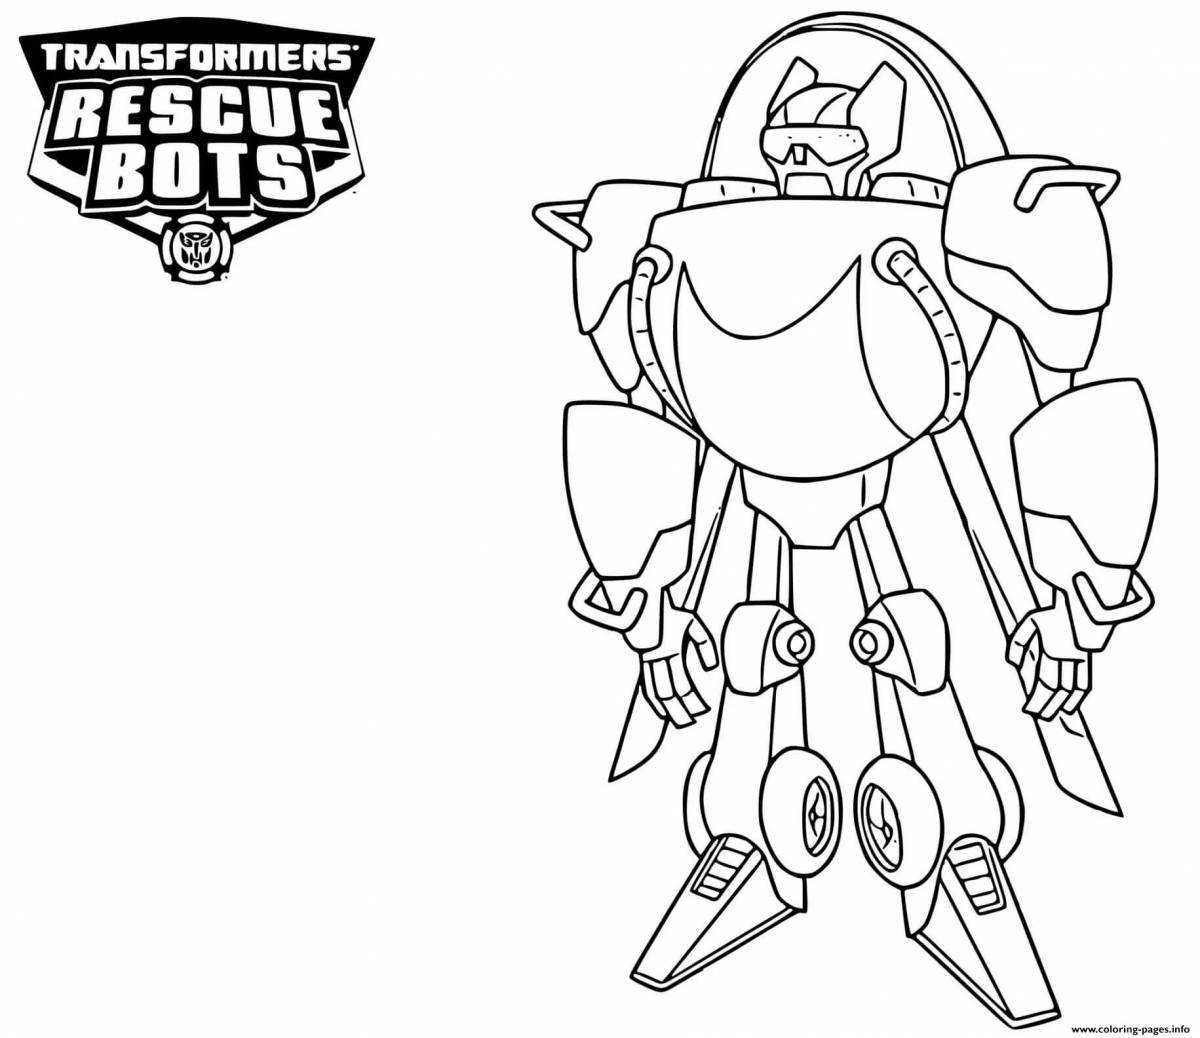 Boogie boogie amazing coloring page